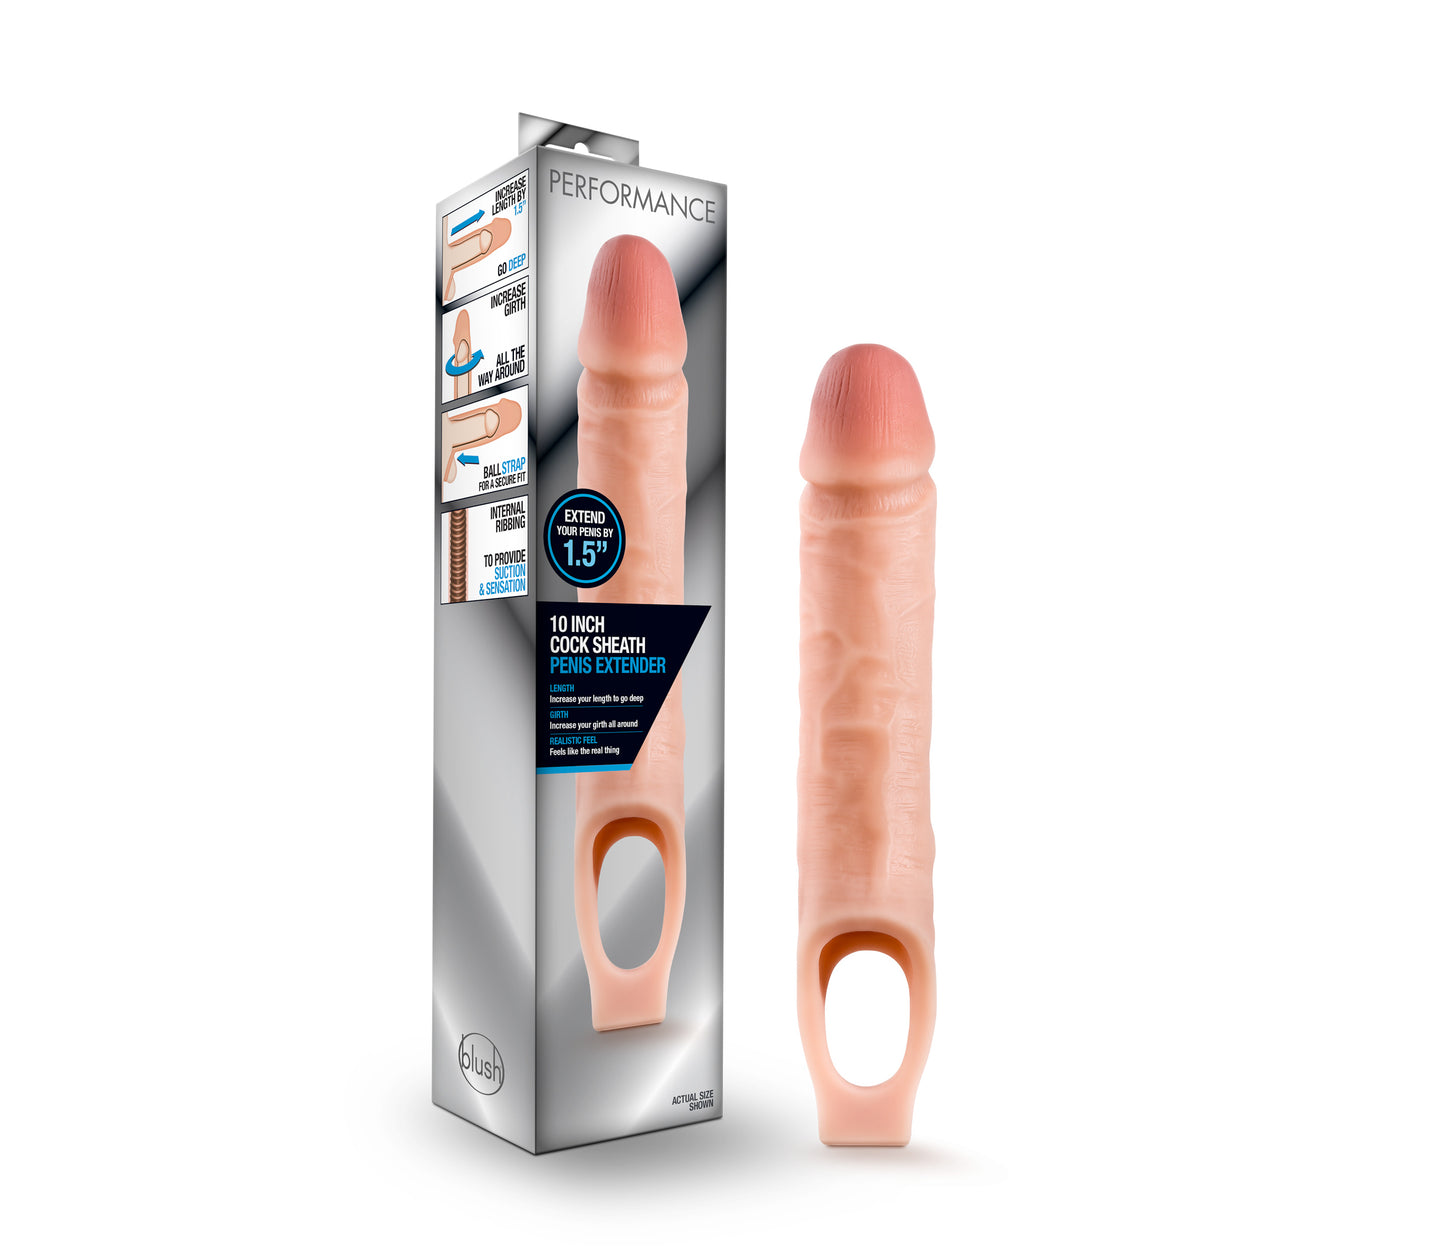 Performance 10in Cock Sheath Penis Extender Vanilla - Just for you desires